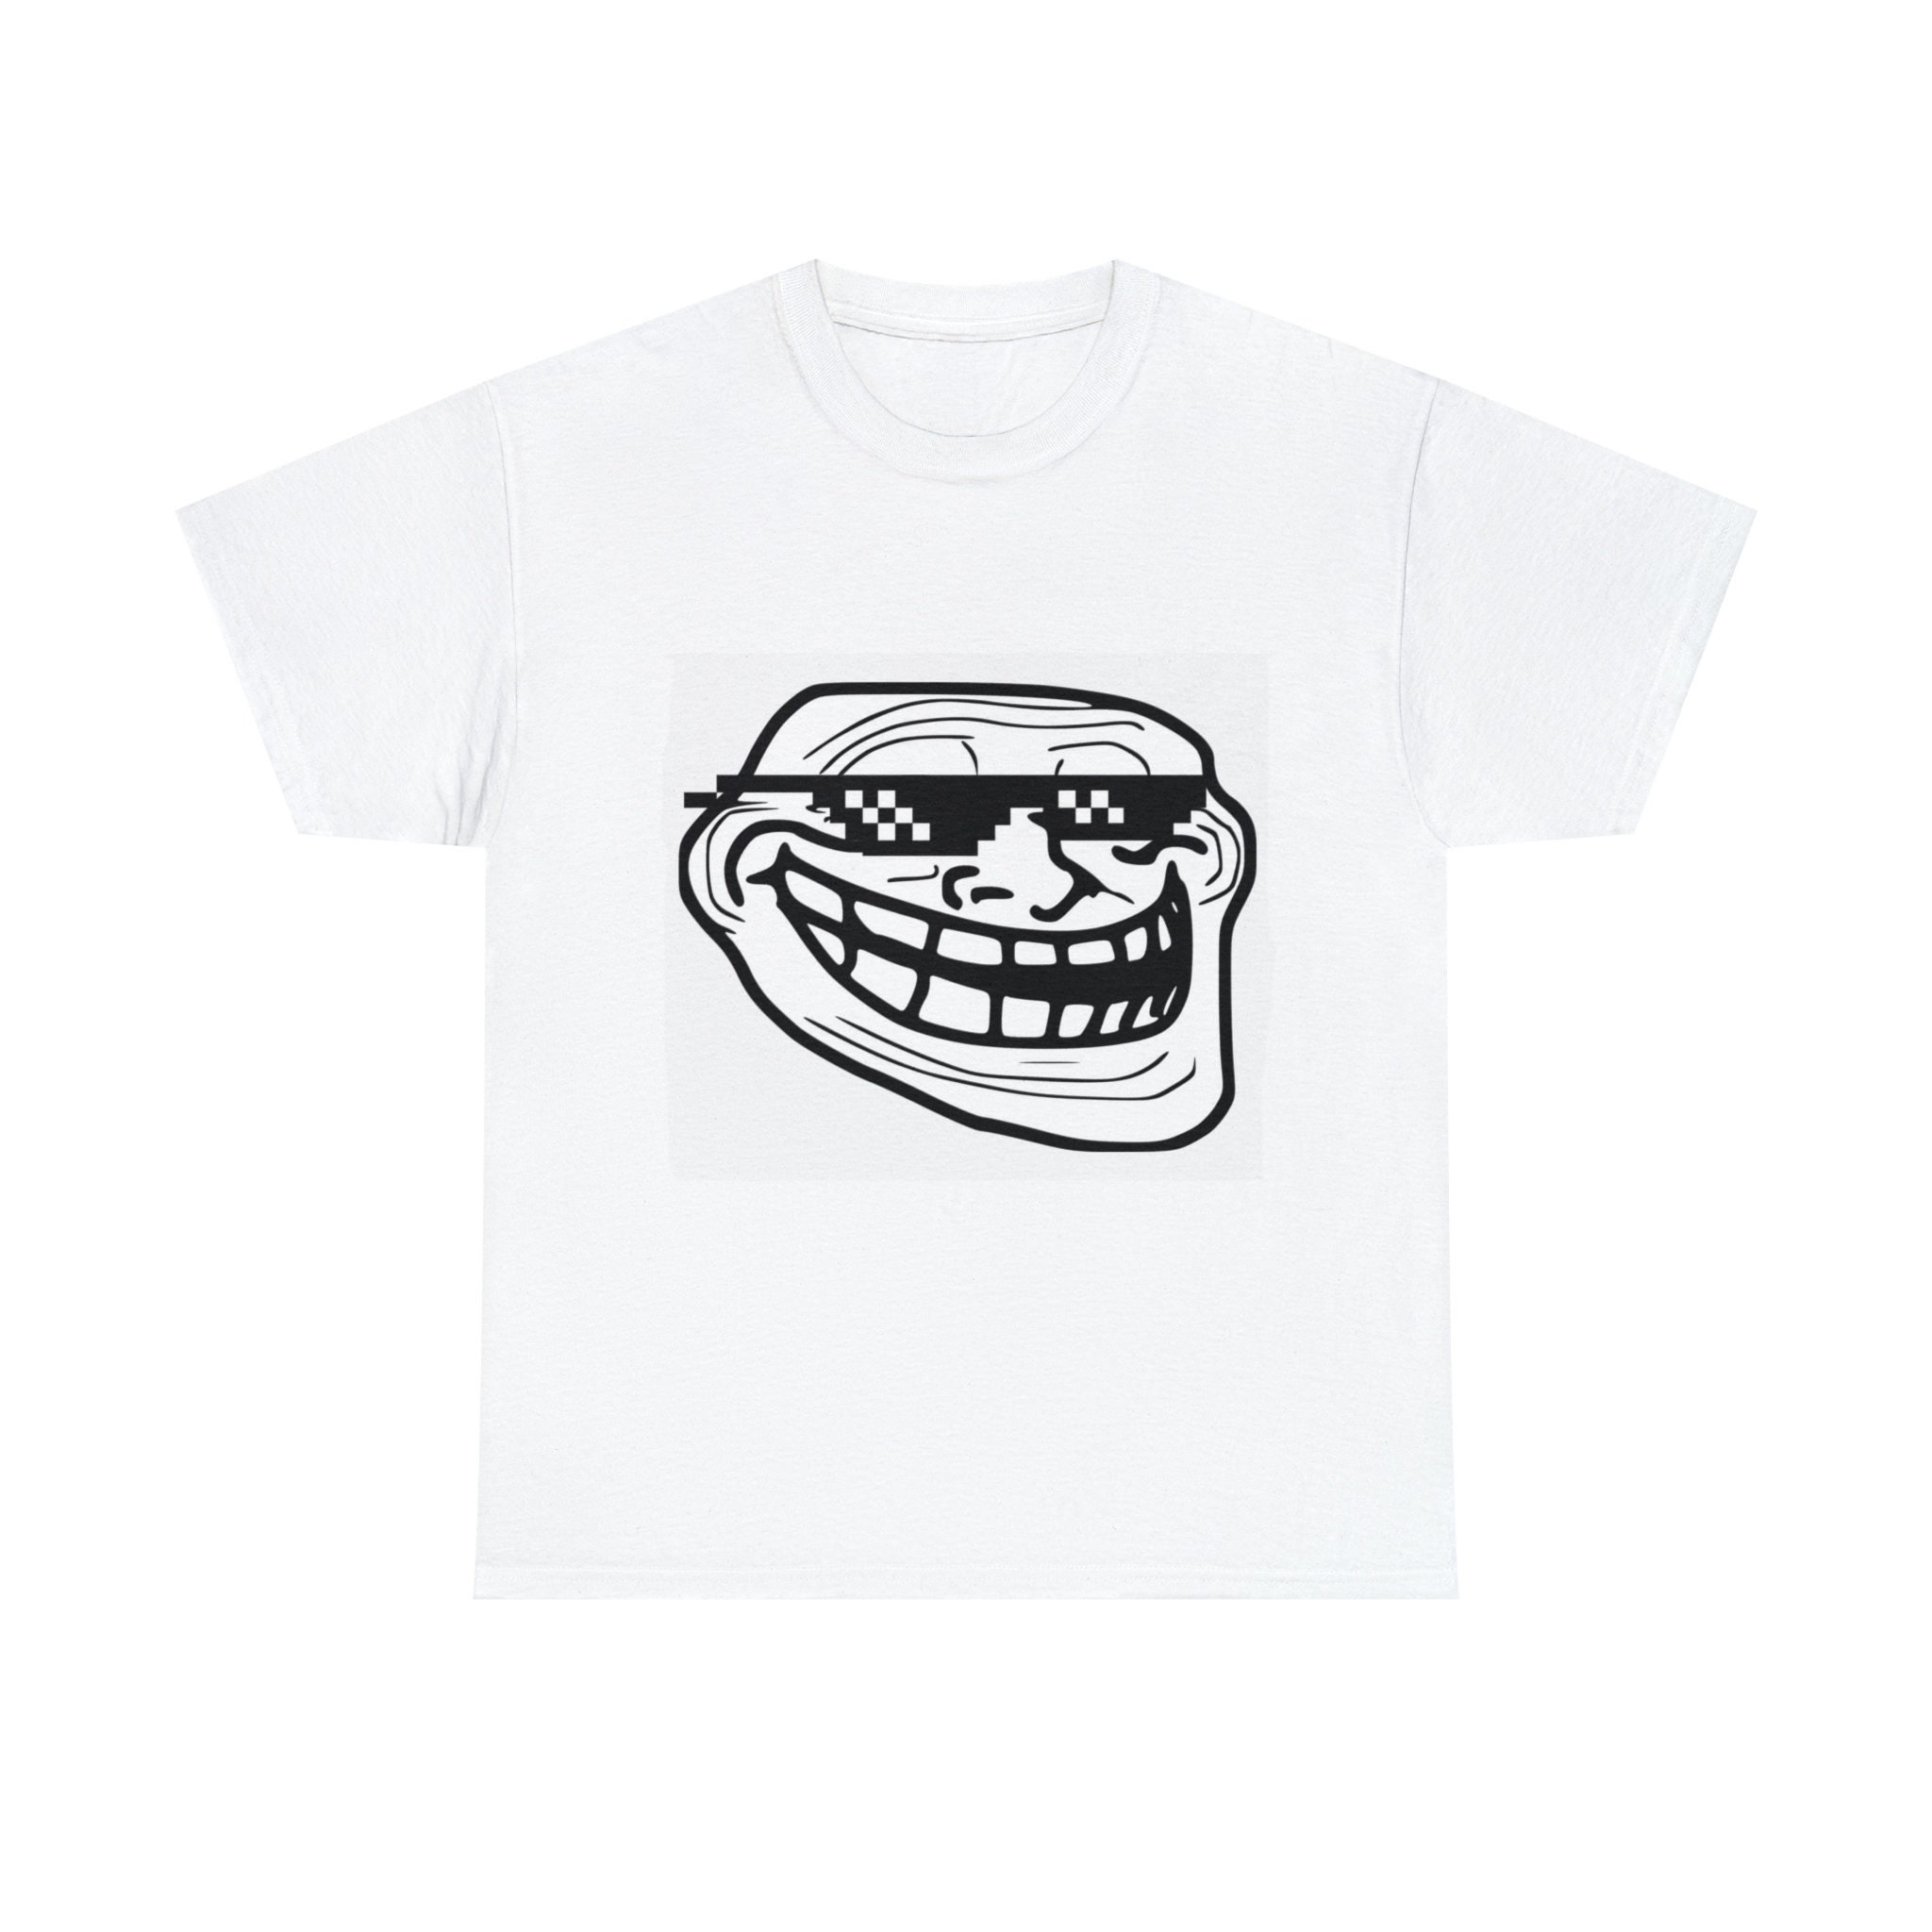 Trollface T-Shirt - 24h delivery